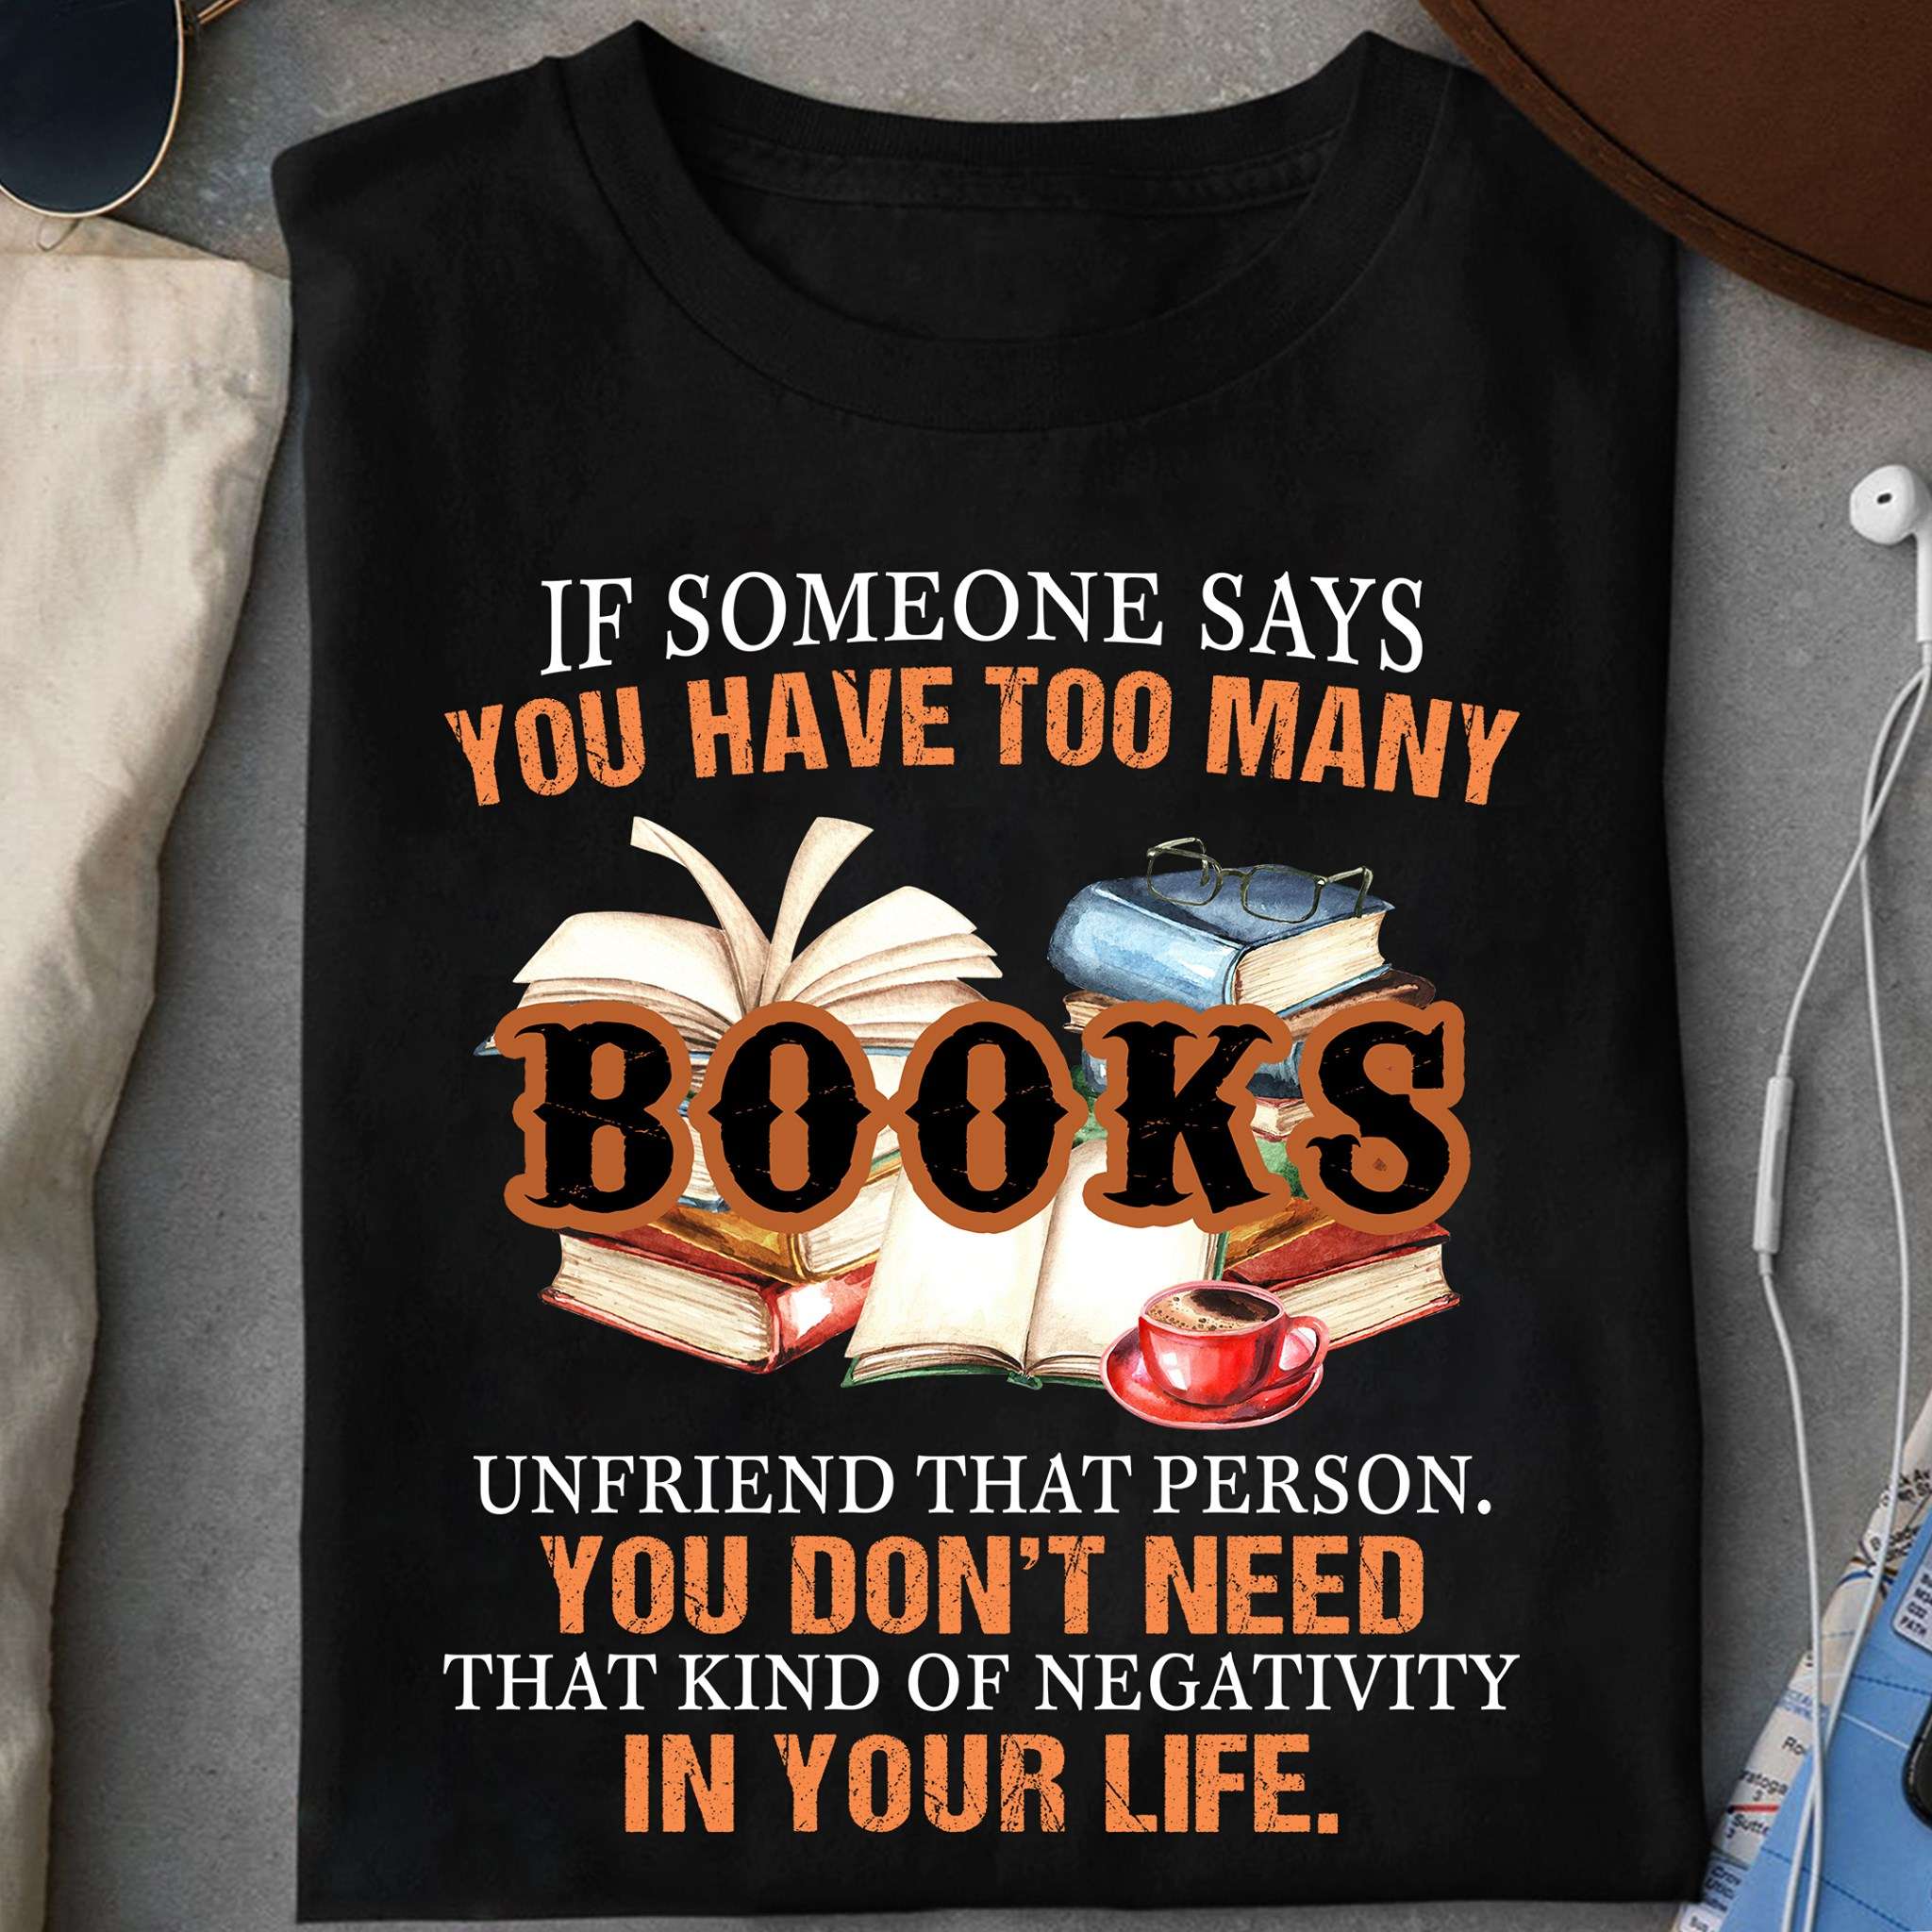 If someone says you have too many books, unfriend that person, you don't need that kind of negativity